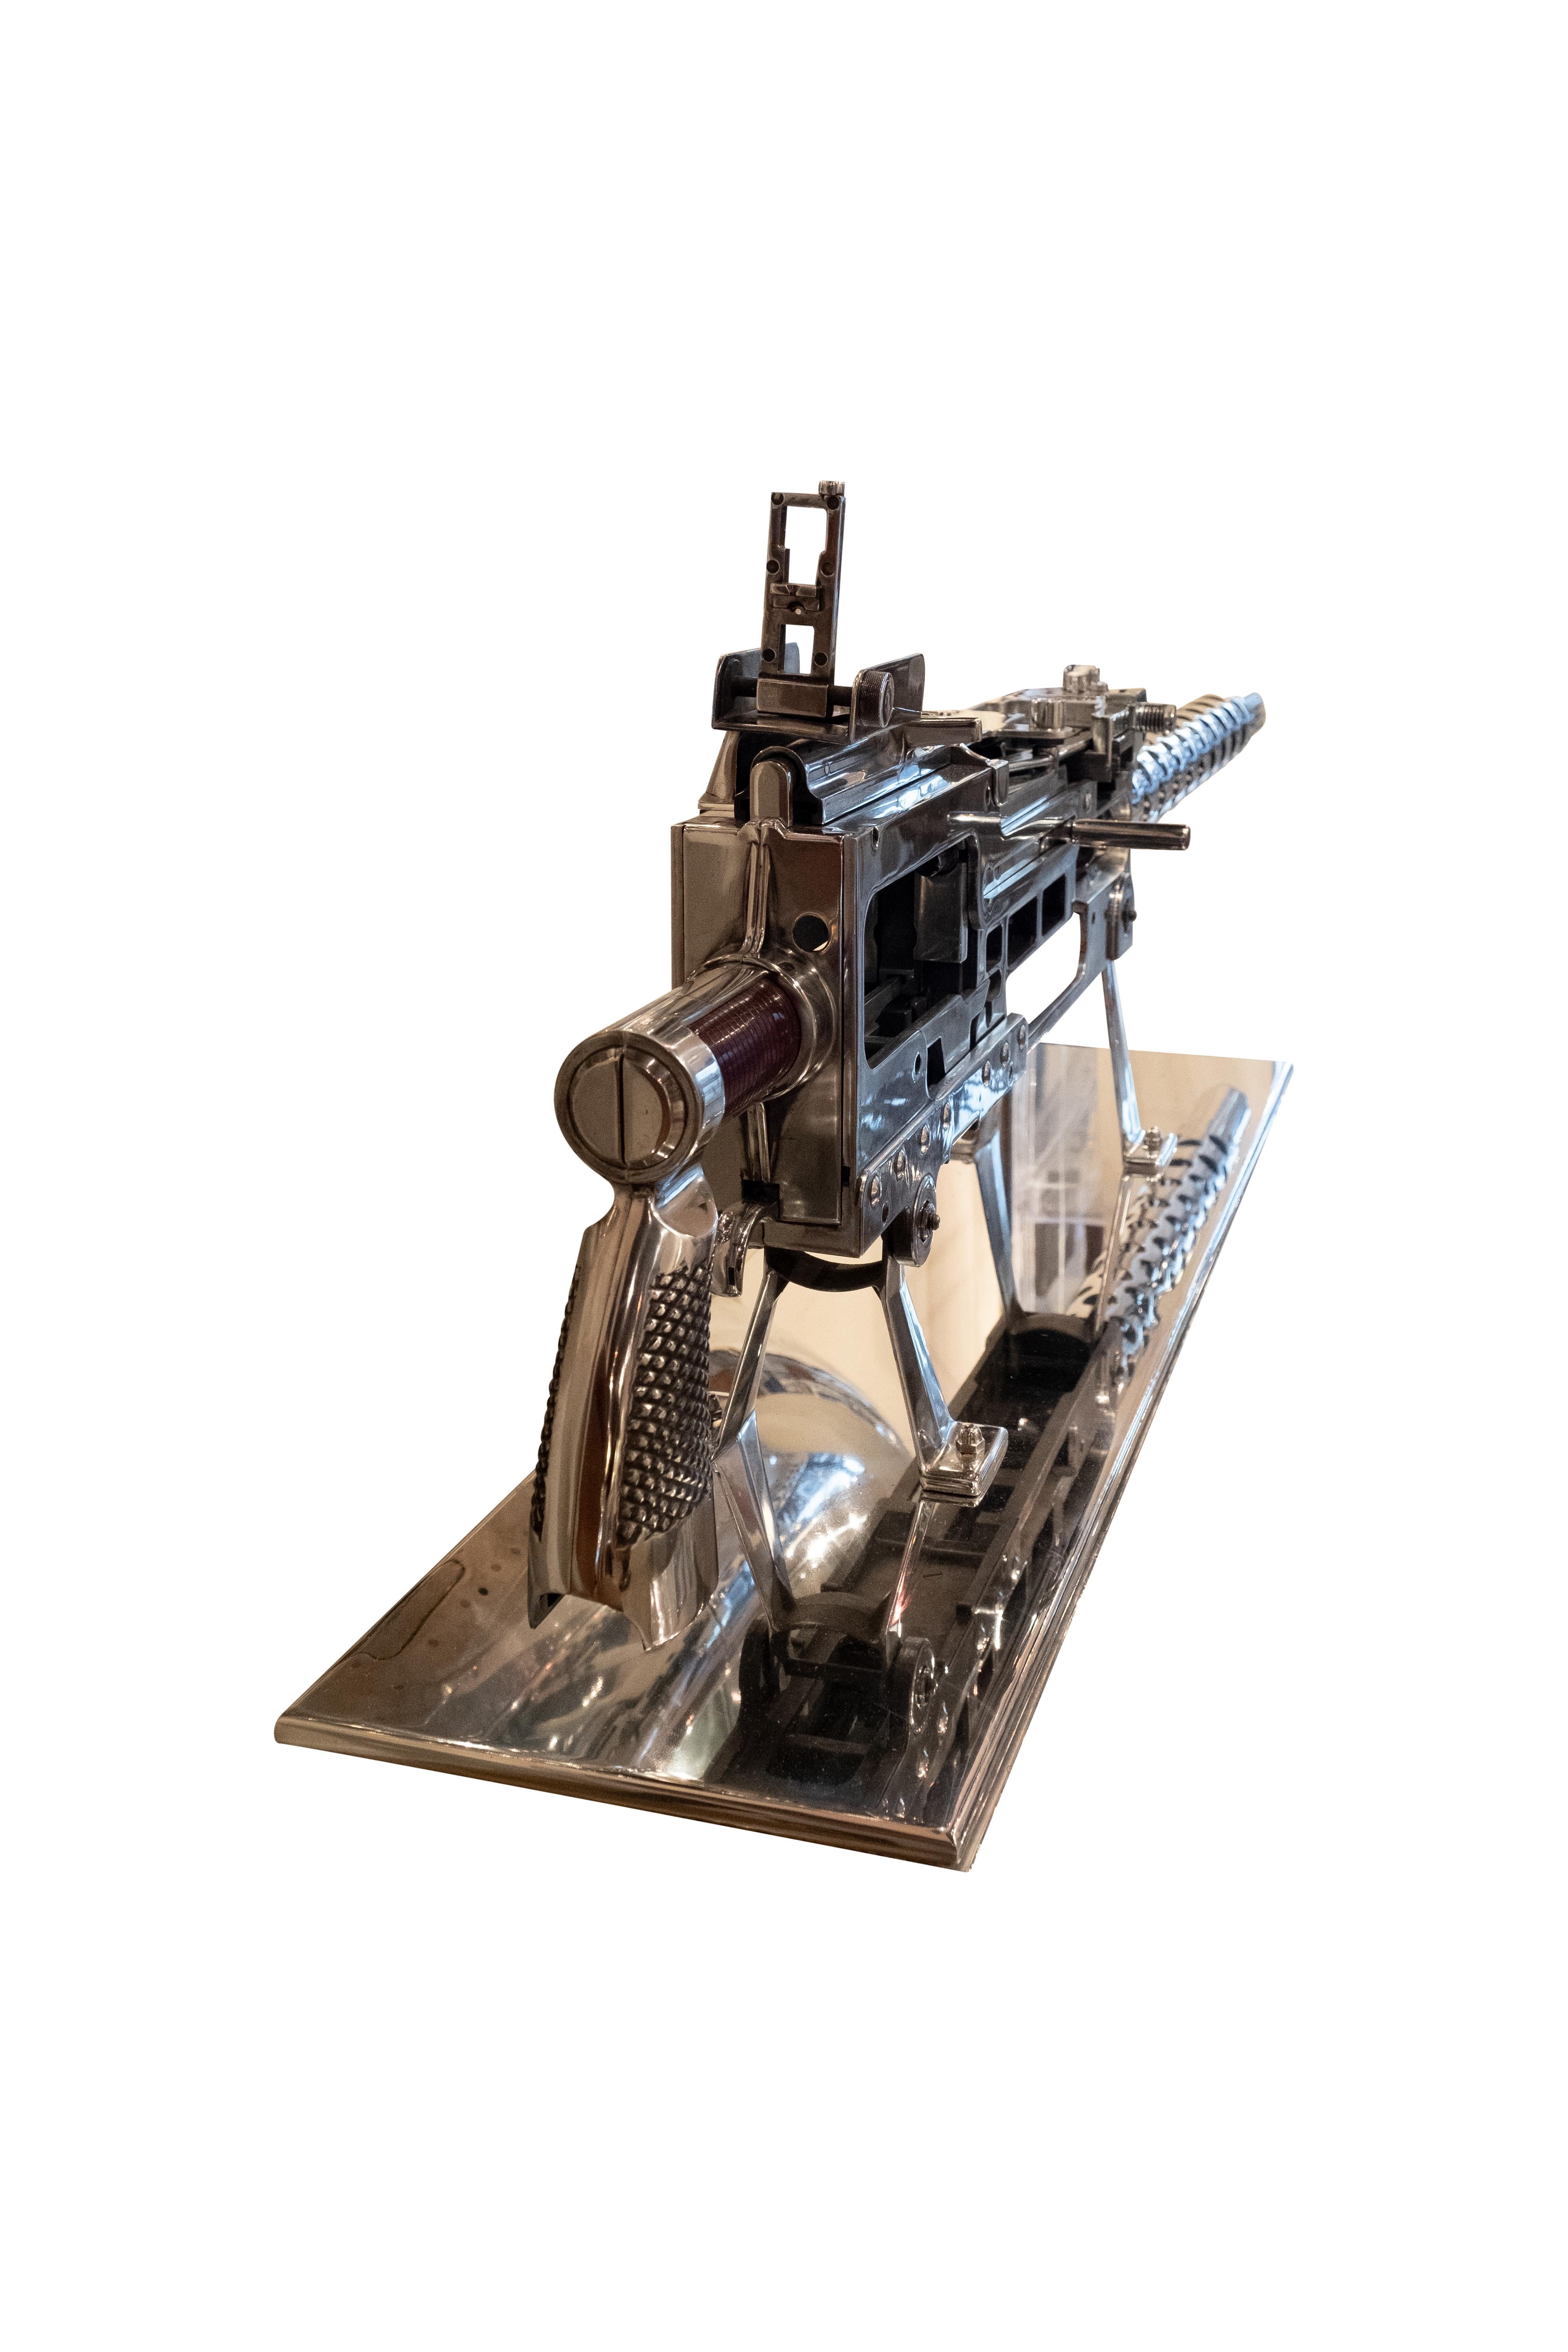 This classroom model of a browning machine gun is an enlarged reproduction of the actual weapon. It was designed for classroom demonstration and instruction. This model permitted the demonstration of the disassembly, assembly, and functioning of the